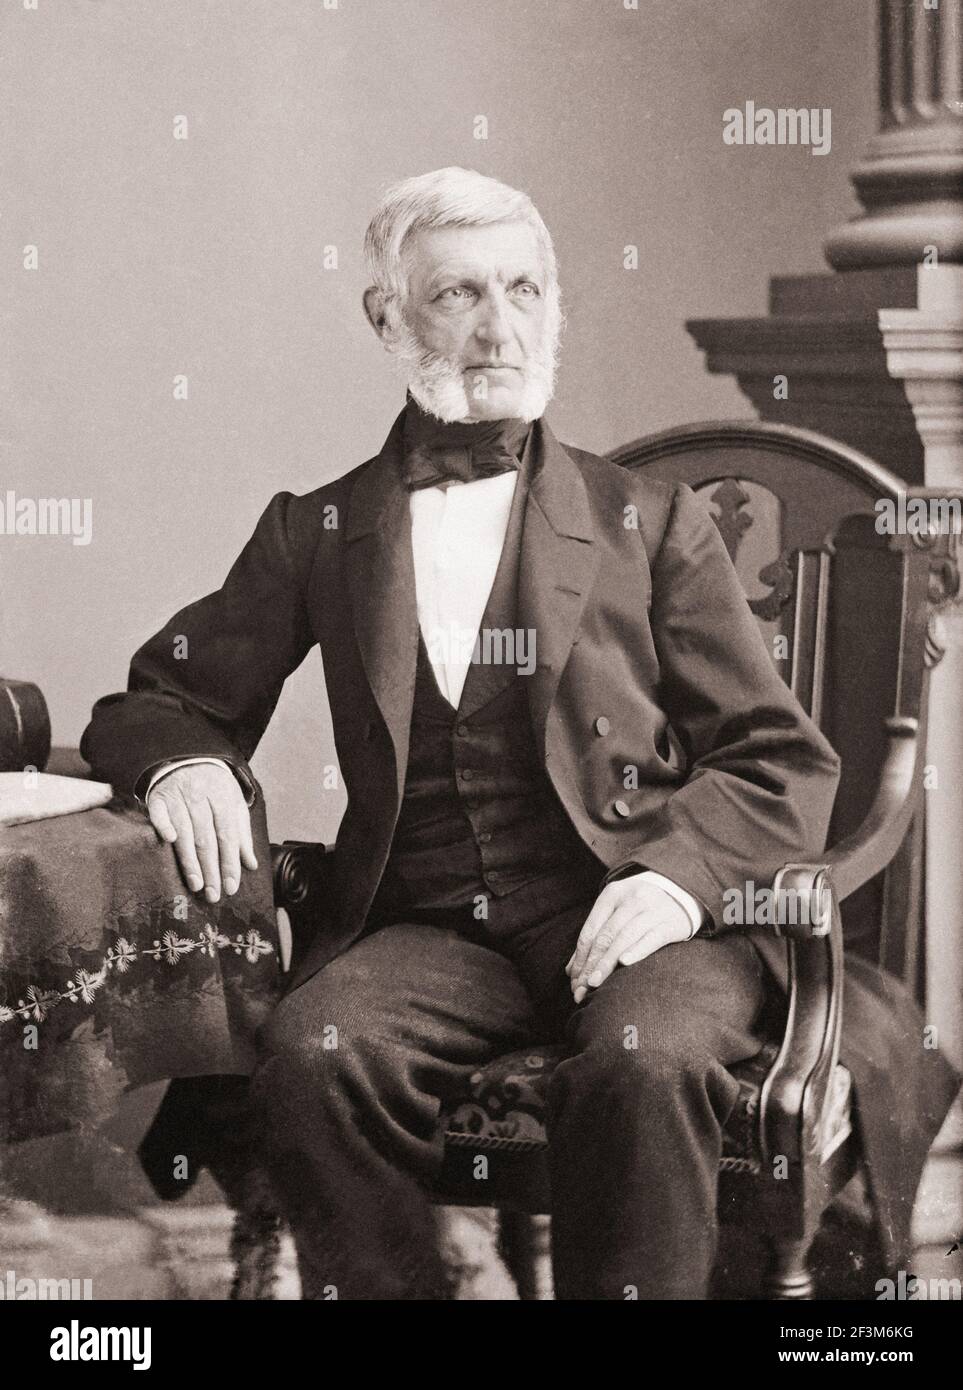 Archival photo of George Bancroft. George Bancroft (1800 – 1891) was an American historian and statesman who was prominent in promoting secondary educ Stock Photo